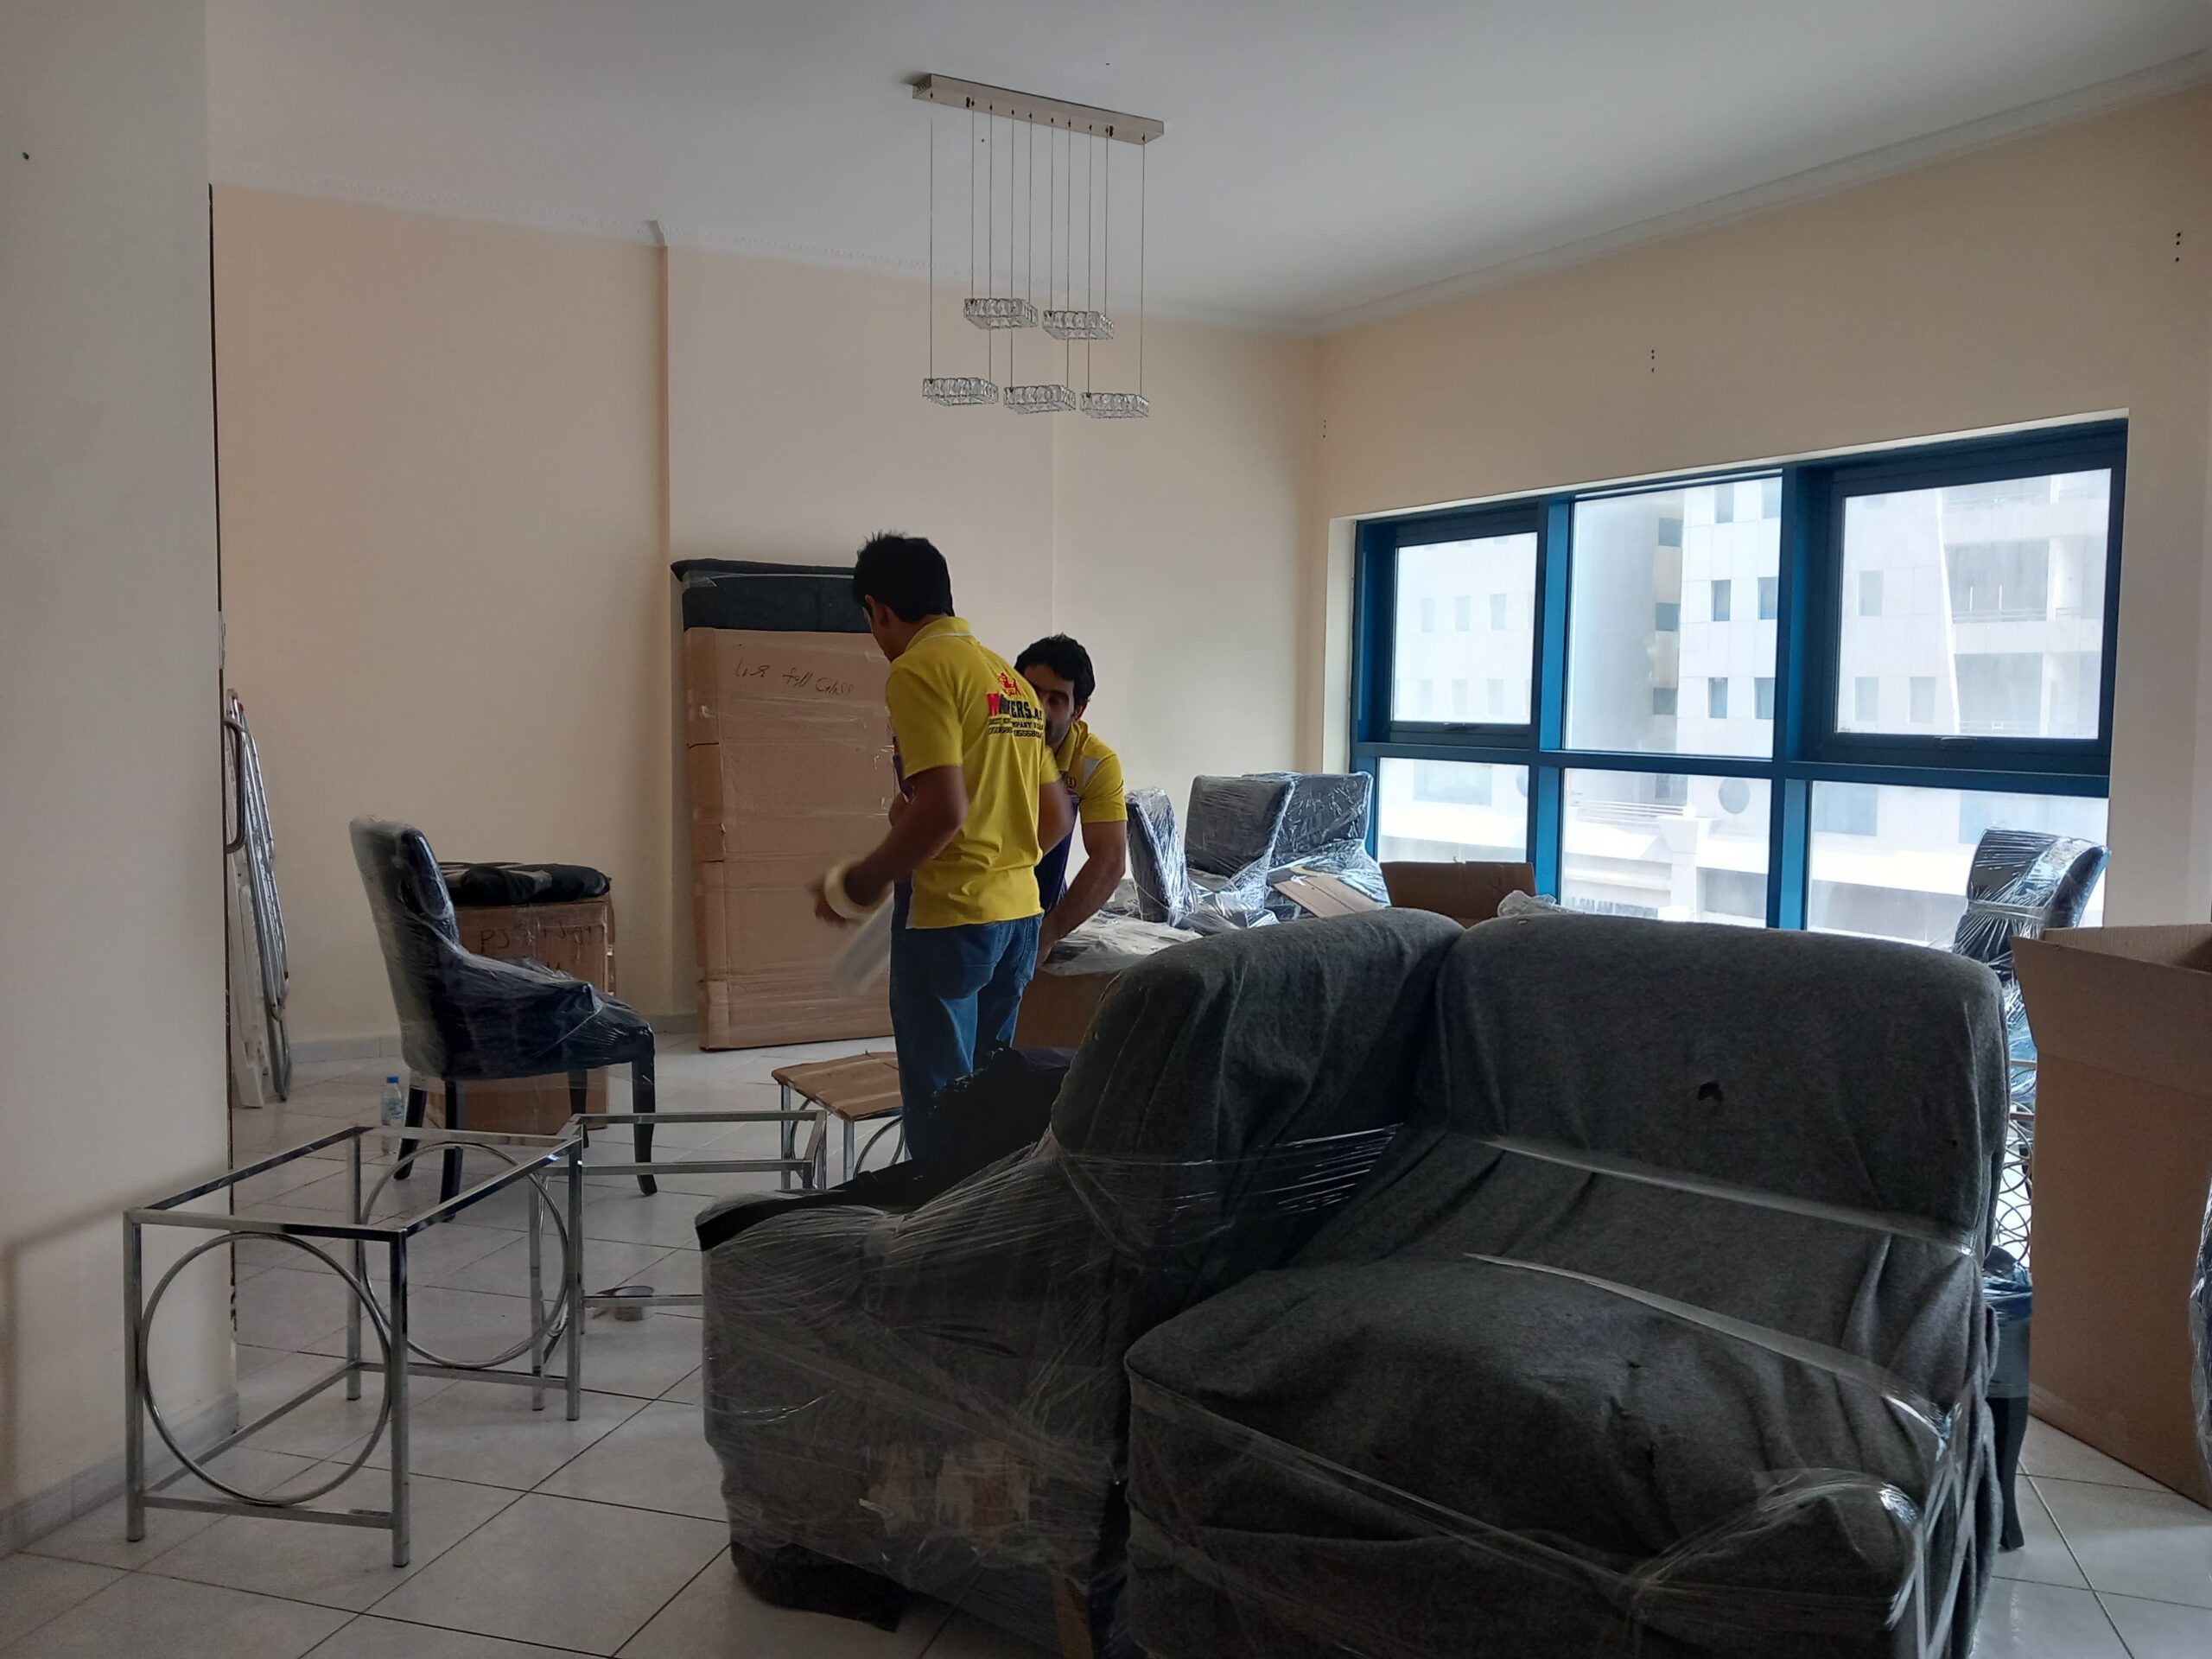 Movers in the UAE moving